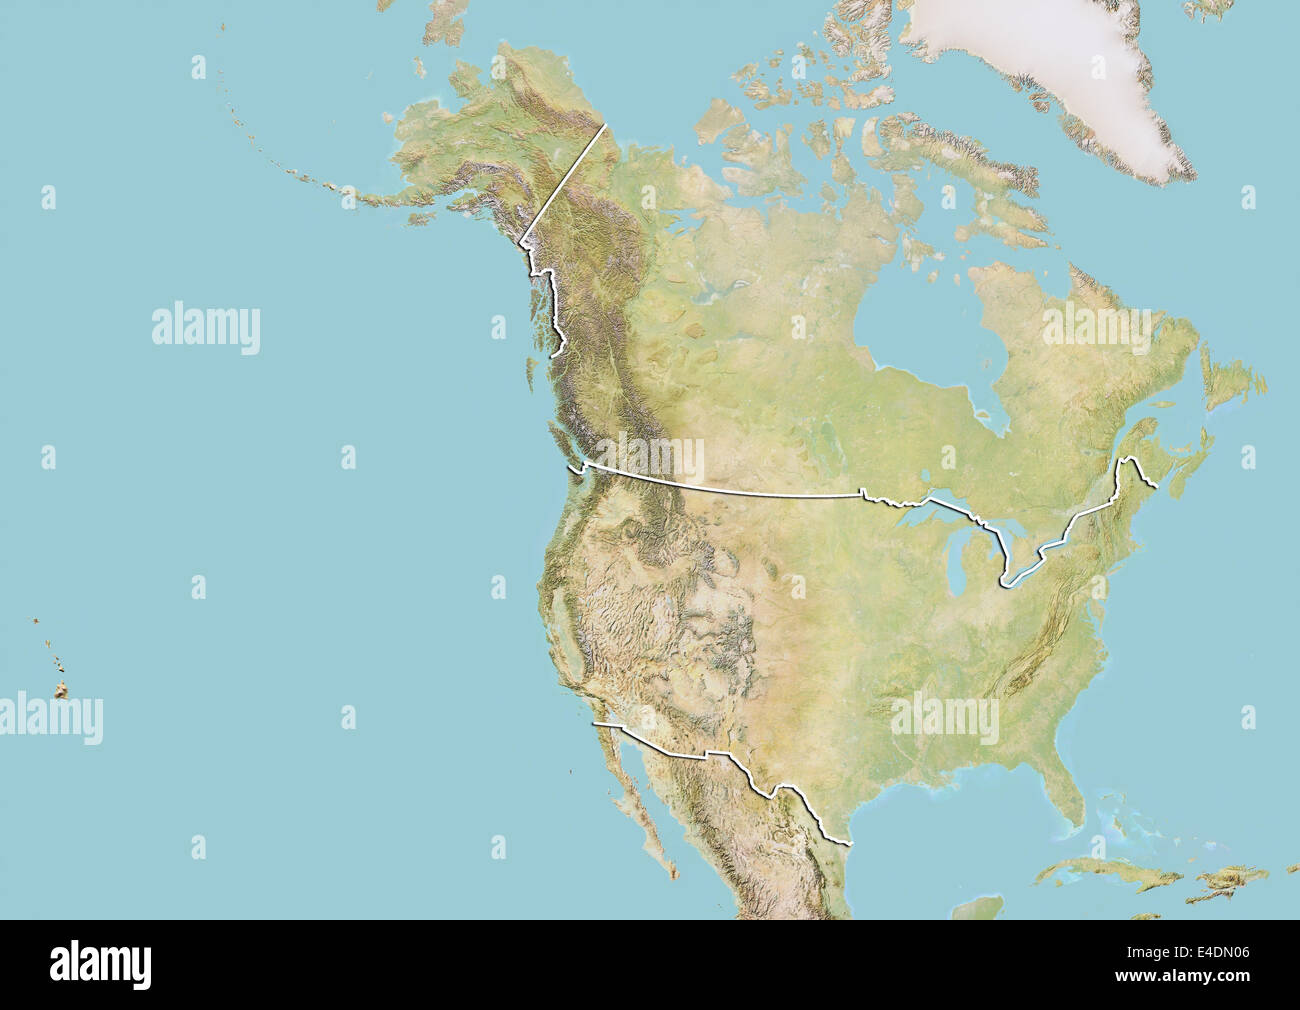 United States and Canada, Relief Map with Border Stock Photo